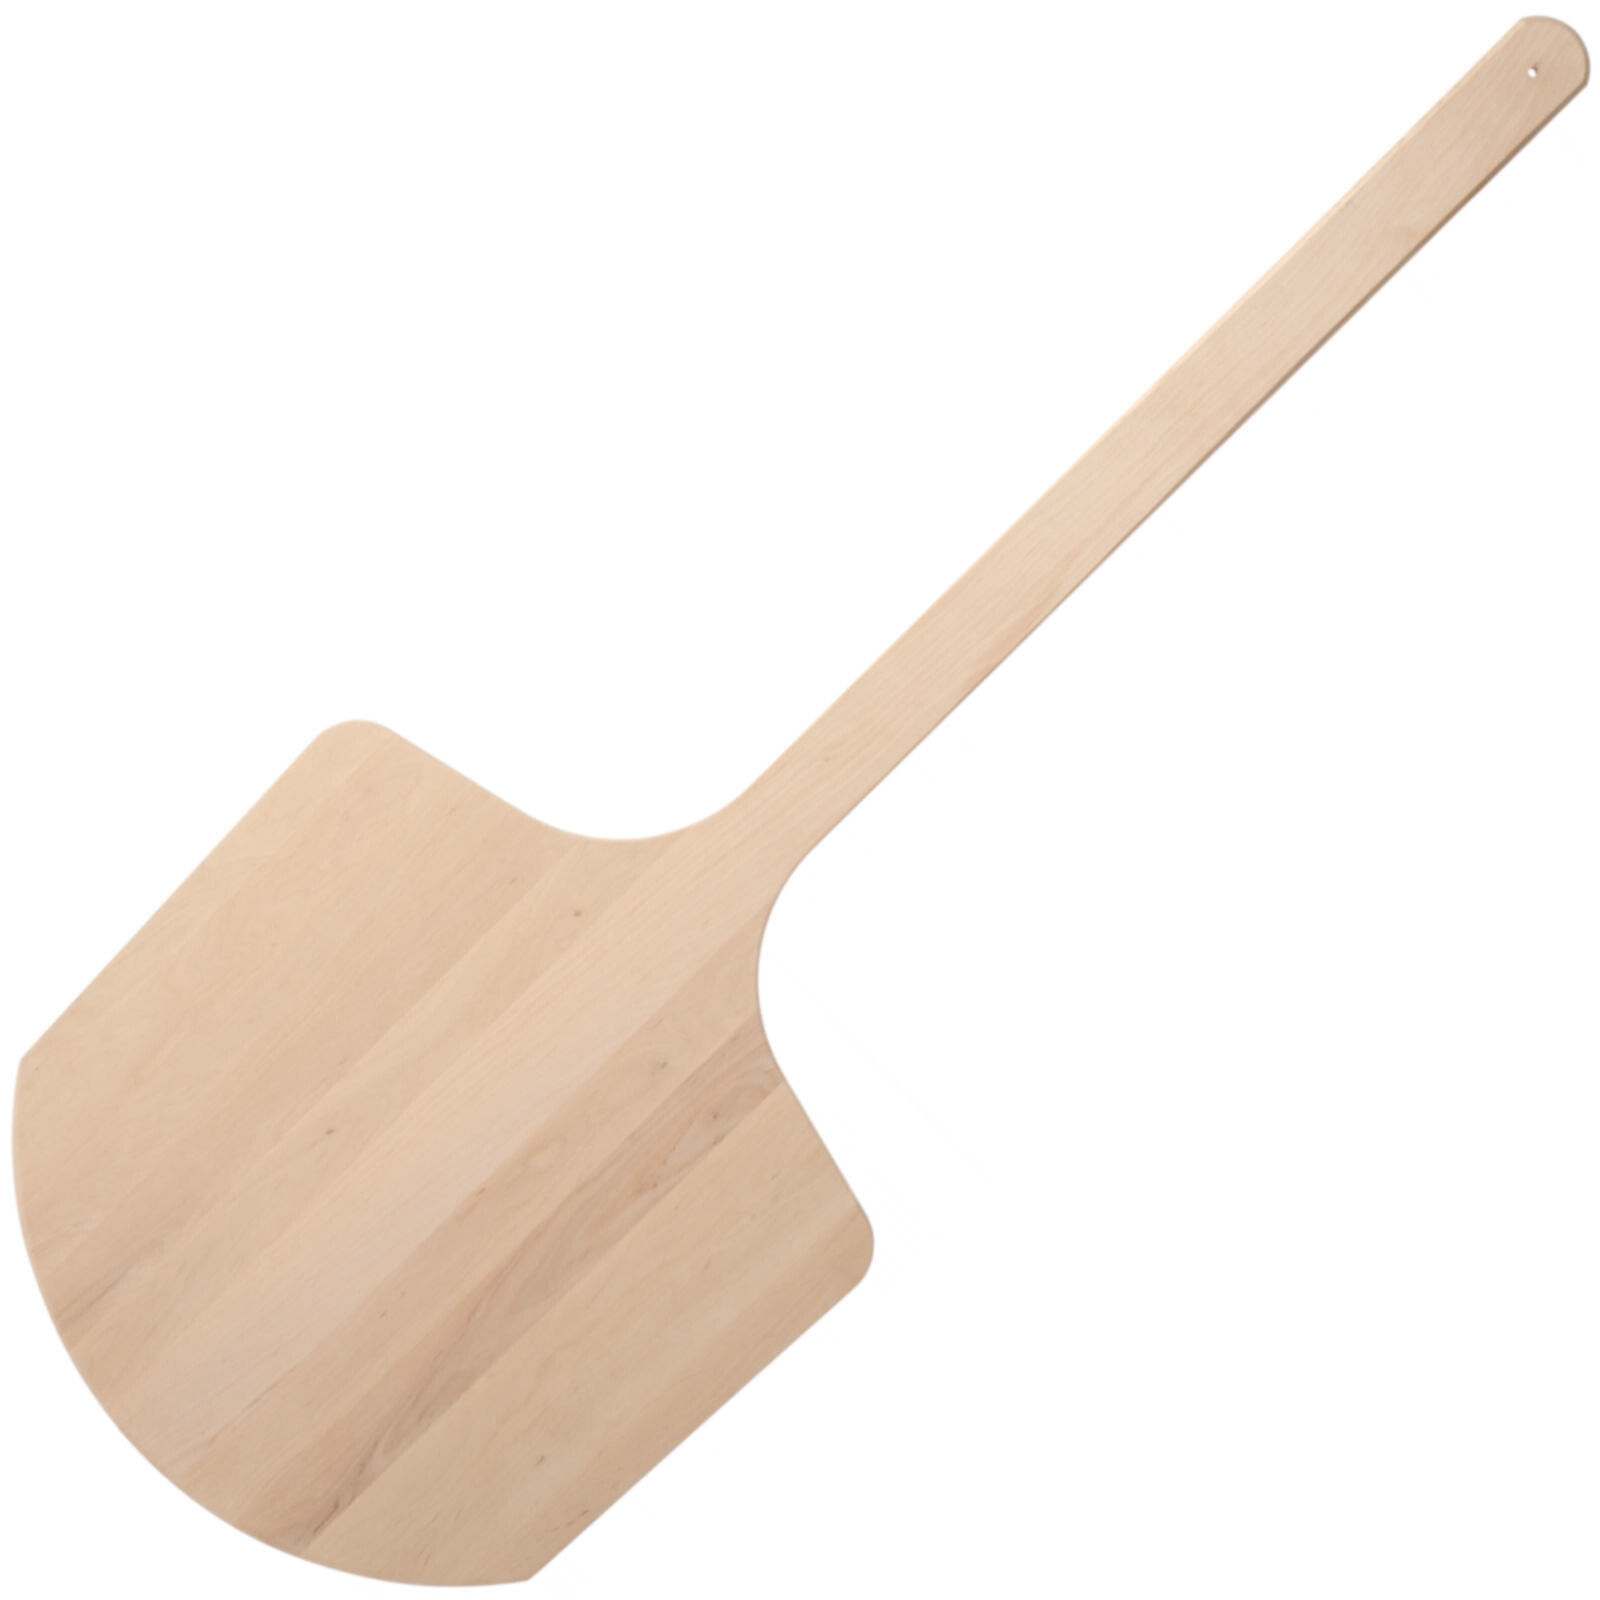 Shovel for taking the pizza from the oven, wooden, 350 mm wide, 1100 mm long - Hendi 617236